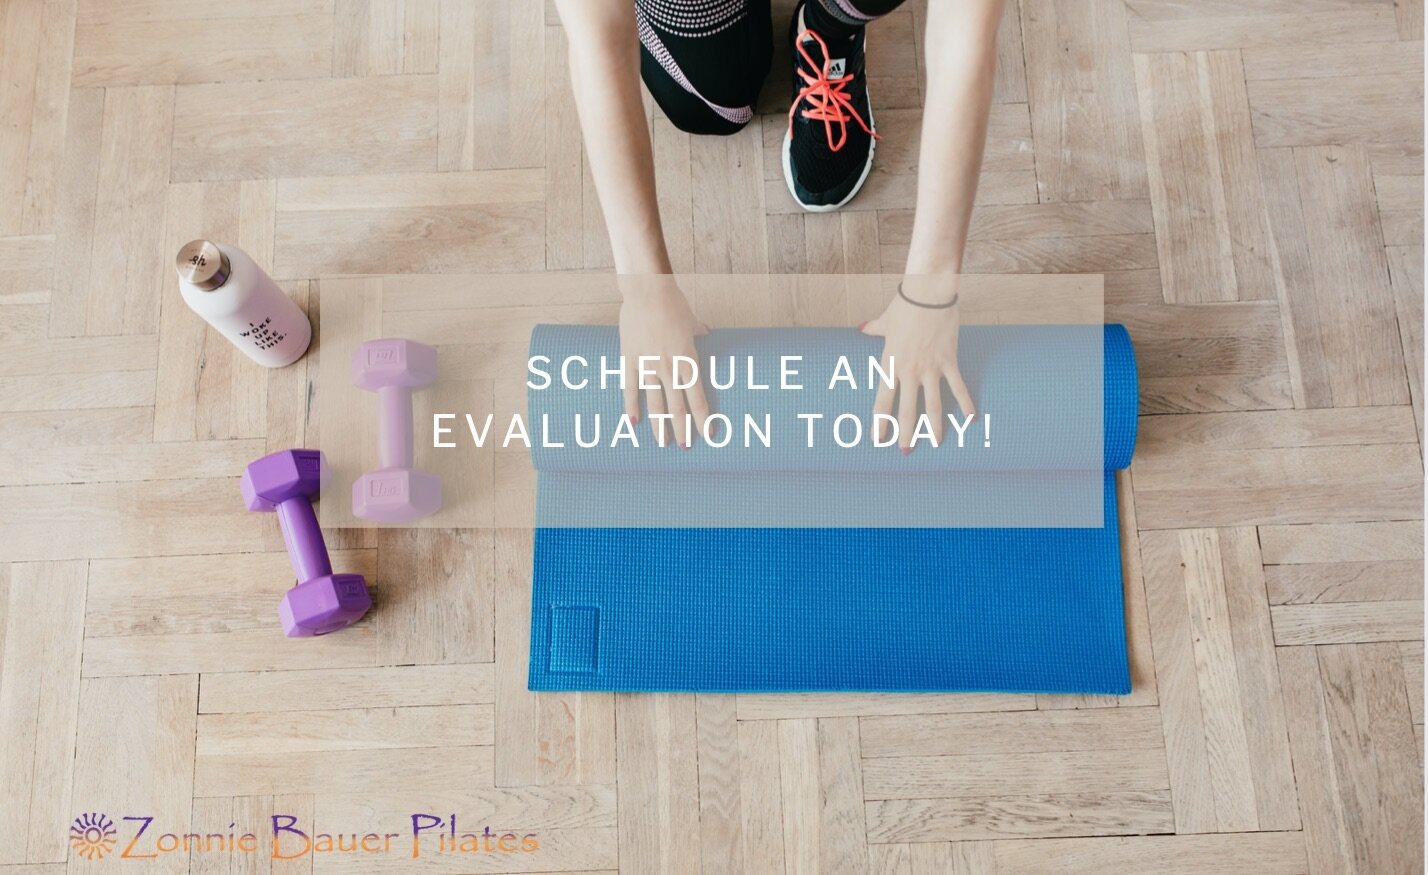 Pilates improves your fitness level because it builds strength from the inside out while balancing muscles throughout your entire body. 
~This results in more power, enhanced agility, flexibility and stamina. Strengthening the small stabilizing muscl